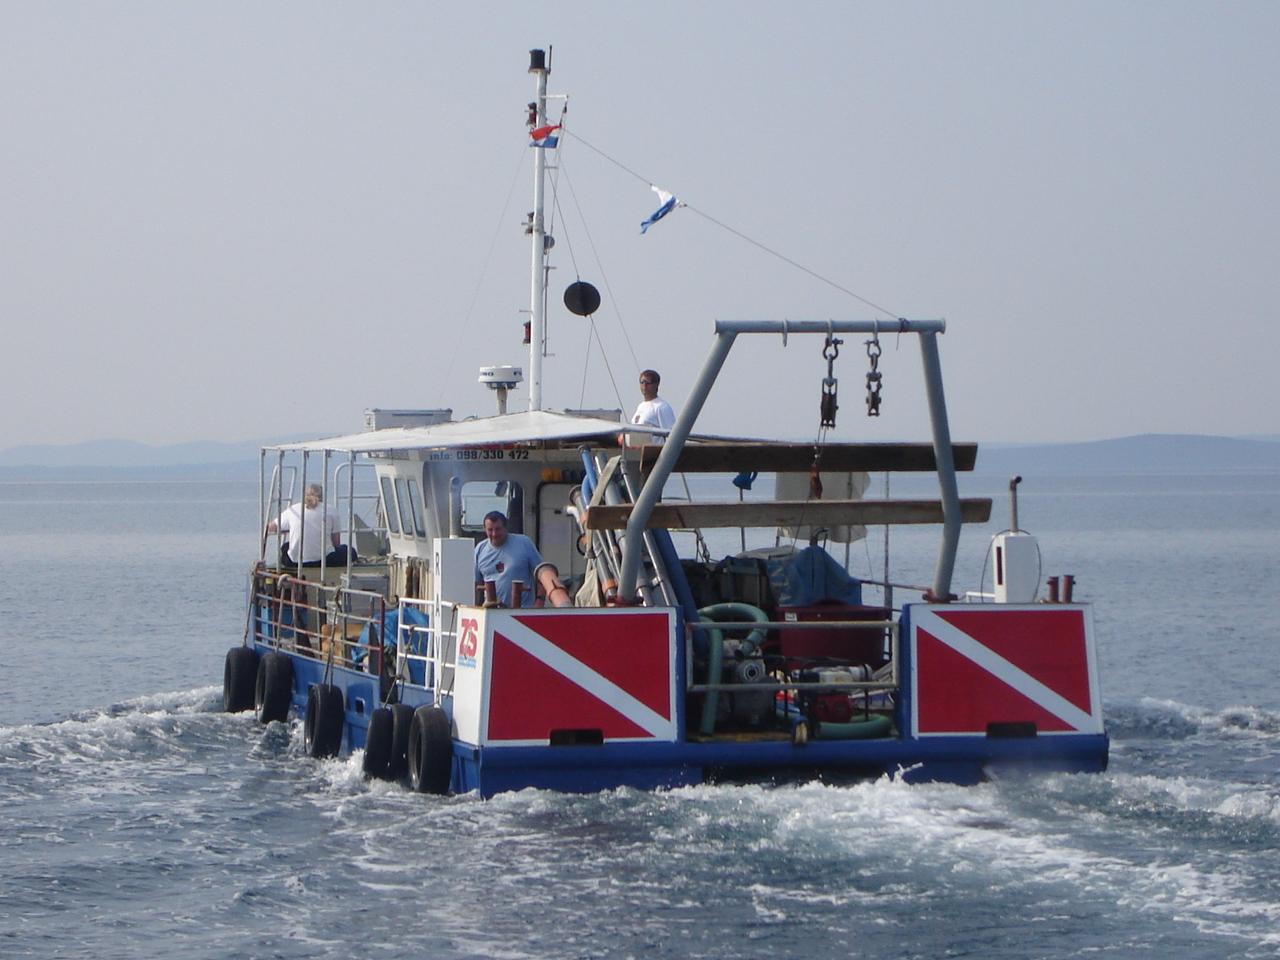 The workboats used during the field school